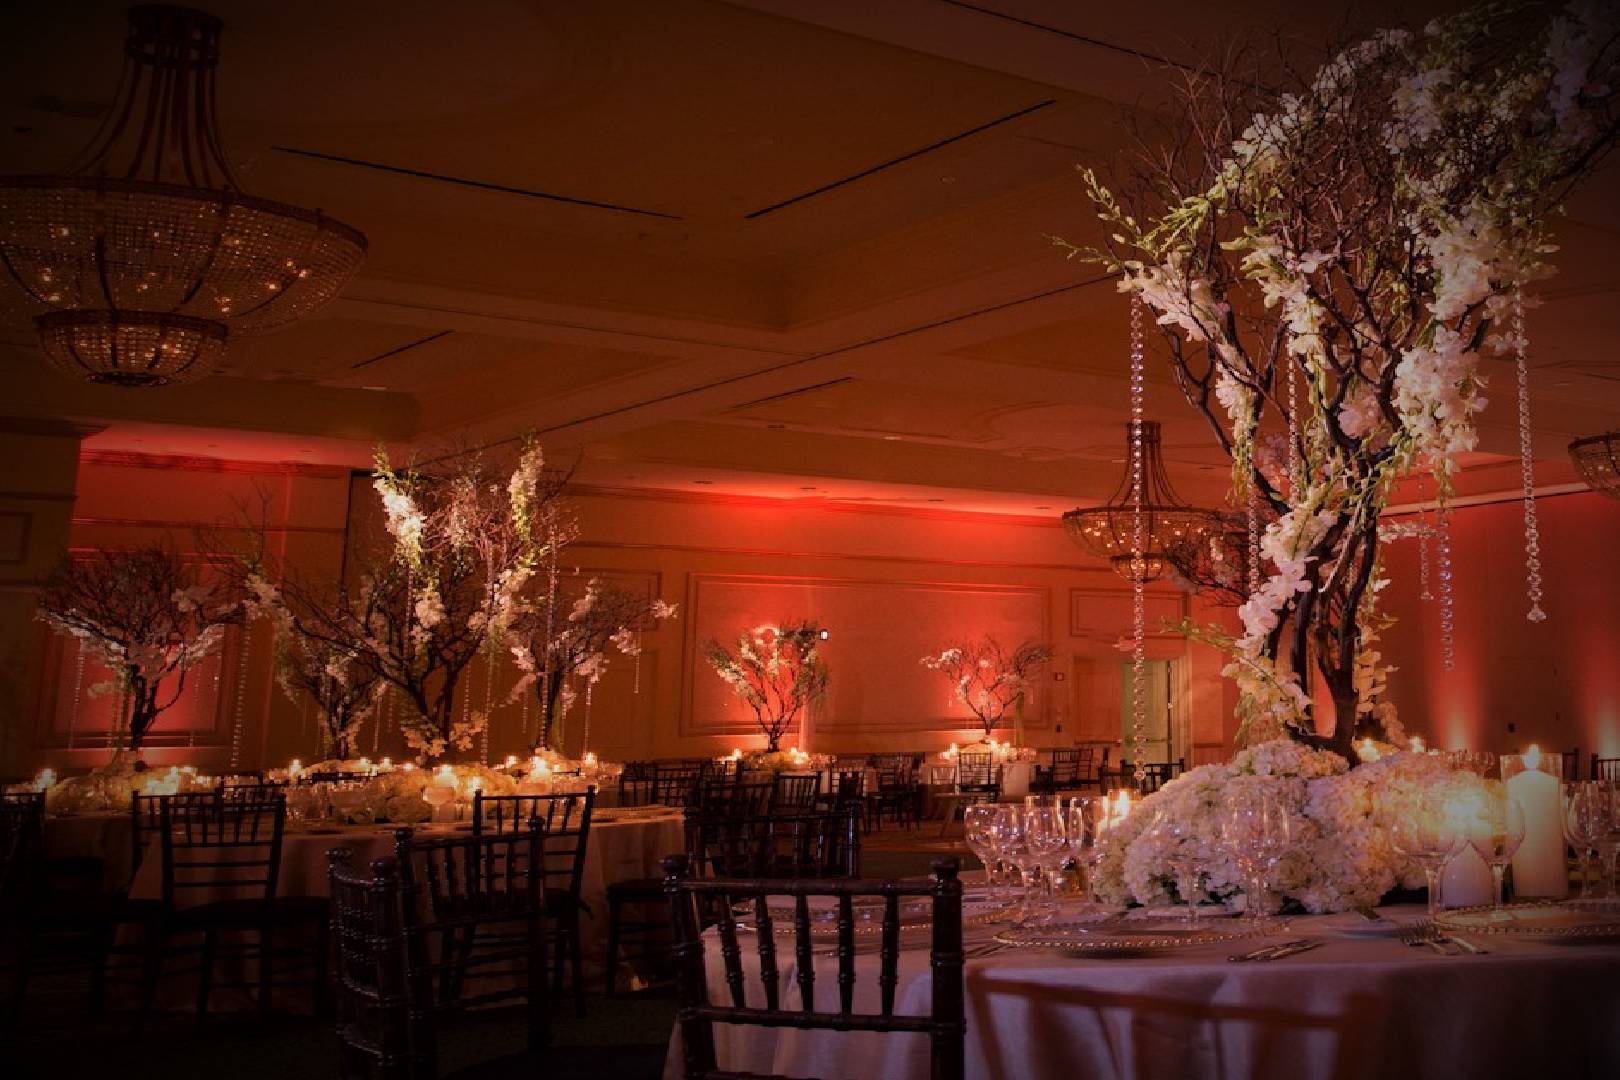 Elegant banquet hall decorated with floral centerpieces, lit candles on tables, and ambient red lighting, with grand chandeliers overhead.